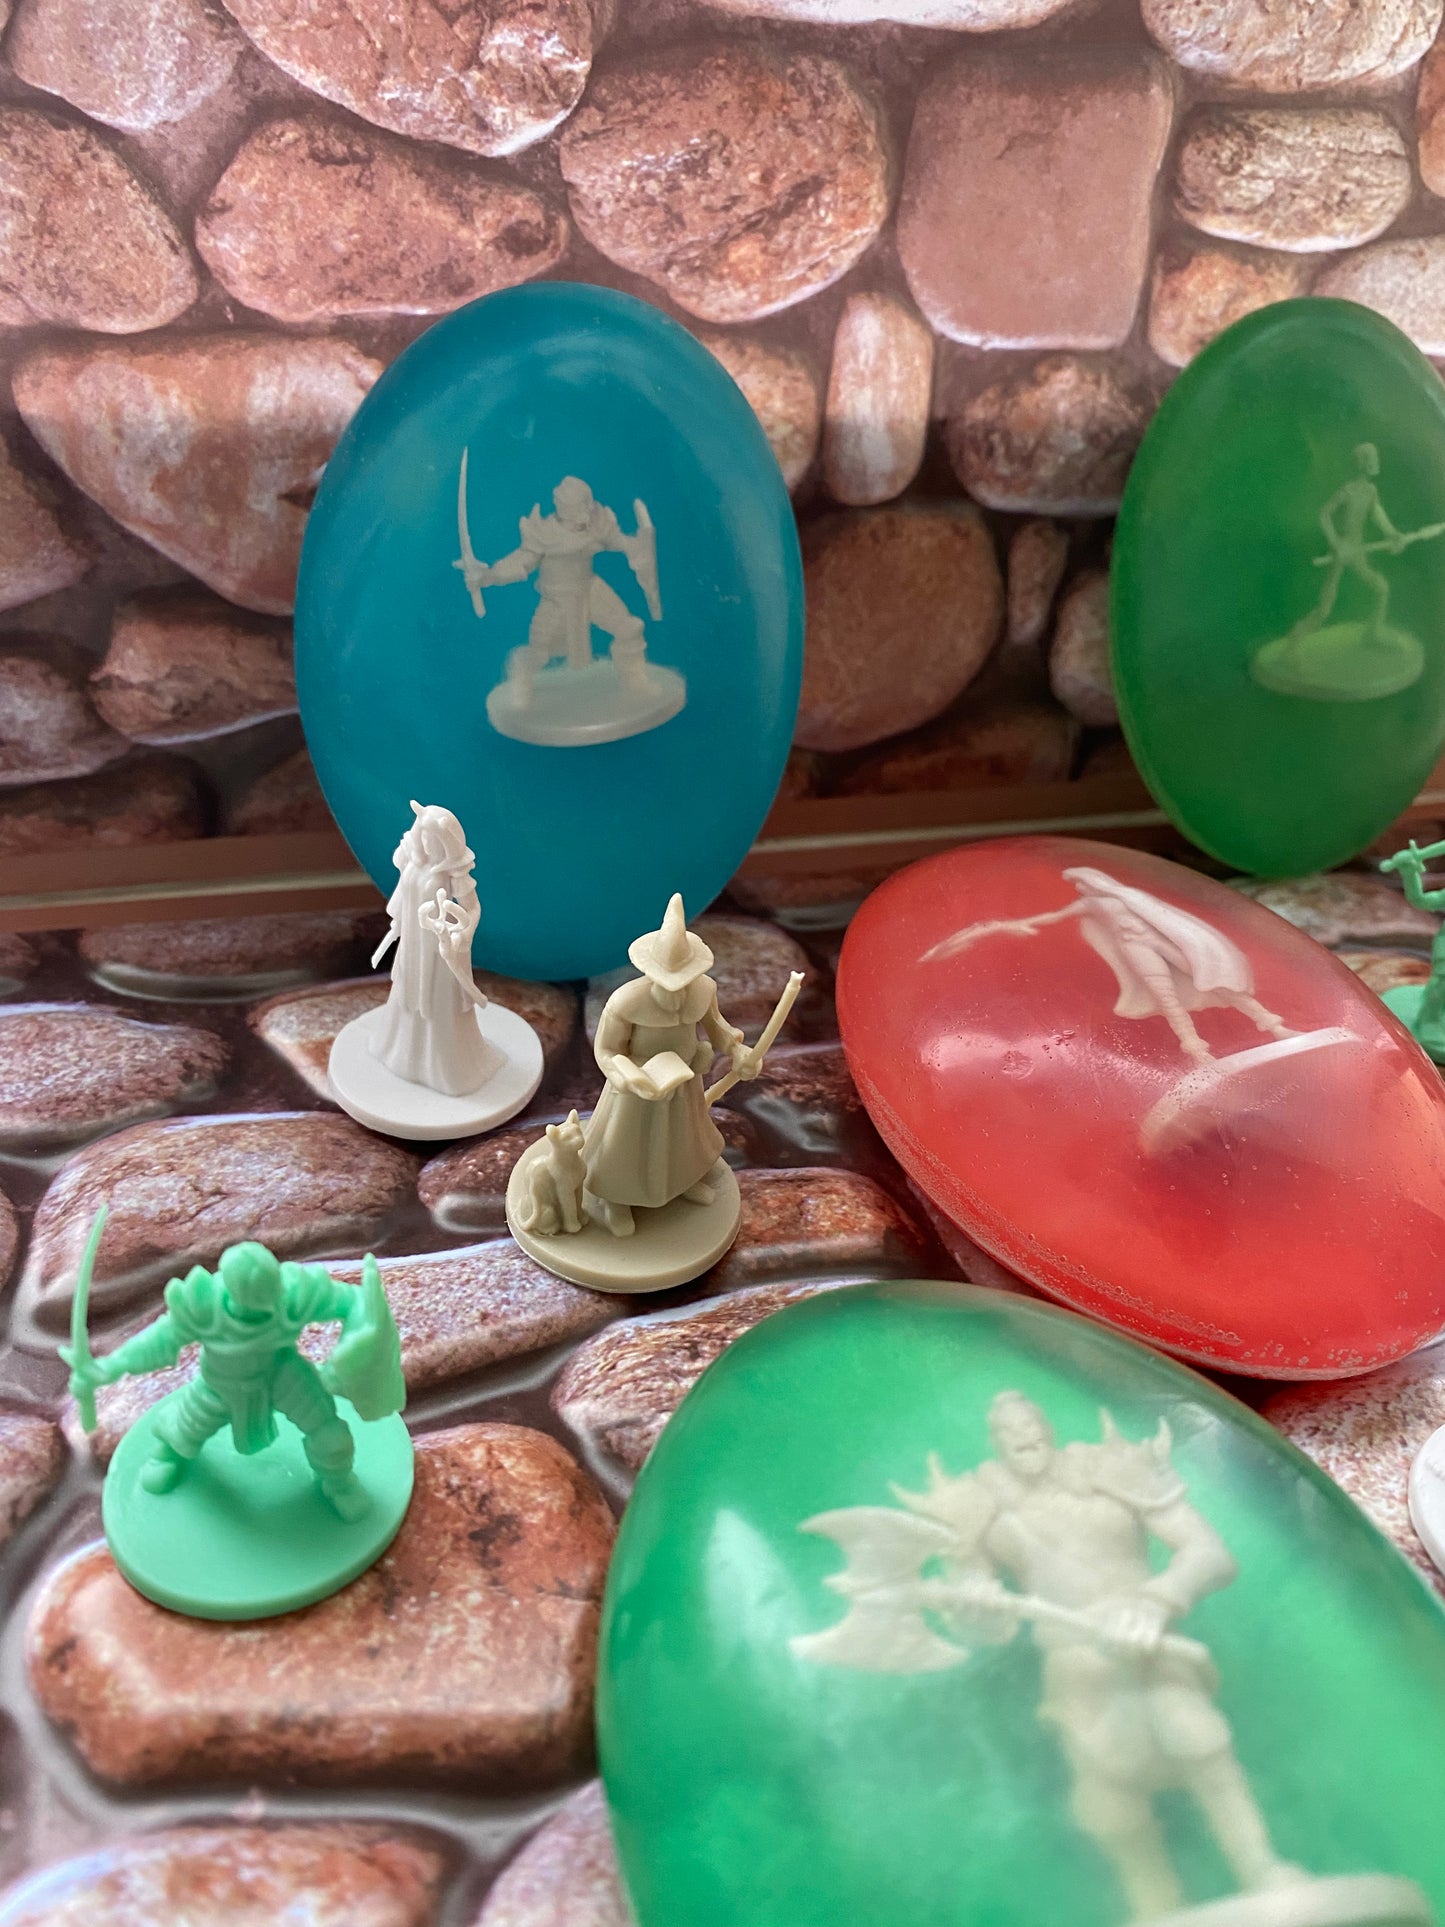 Choose Your Potion Soap with Mystery TTRPG Mini Figure Inside